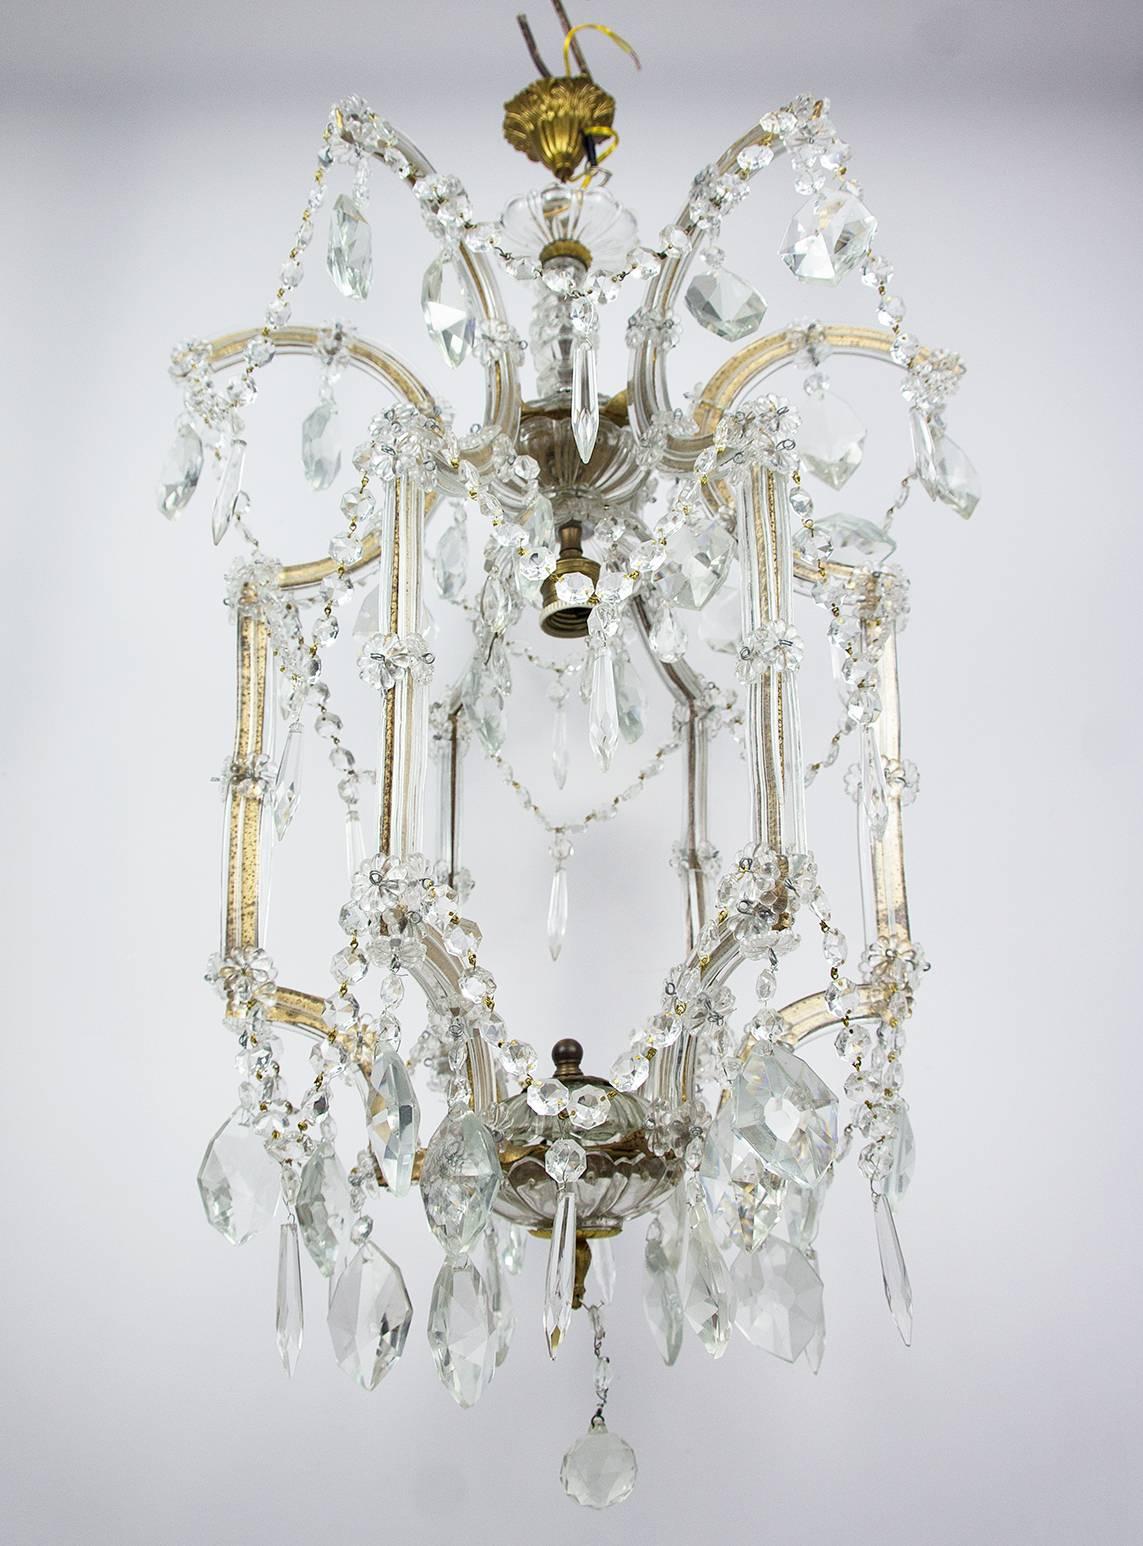 Beautiful vintage 1940s typical Italian Murano glass and crystal drop Maria-Theresa style cage chandelier on a brass frame.
Very good vintage condition
Acquired in Italy, shipping from Latvia
One light bulb
You must use professional electrician